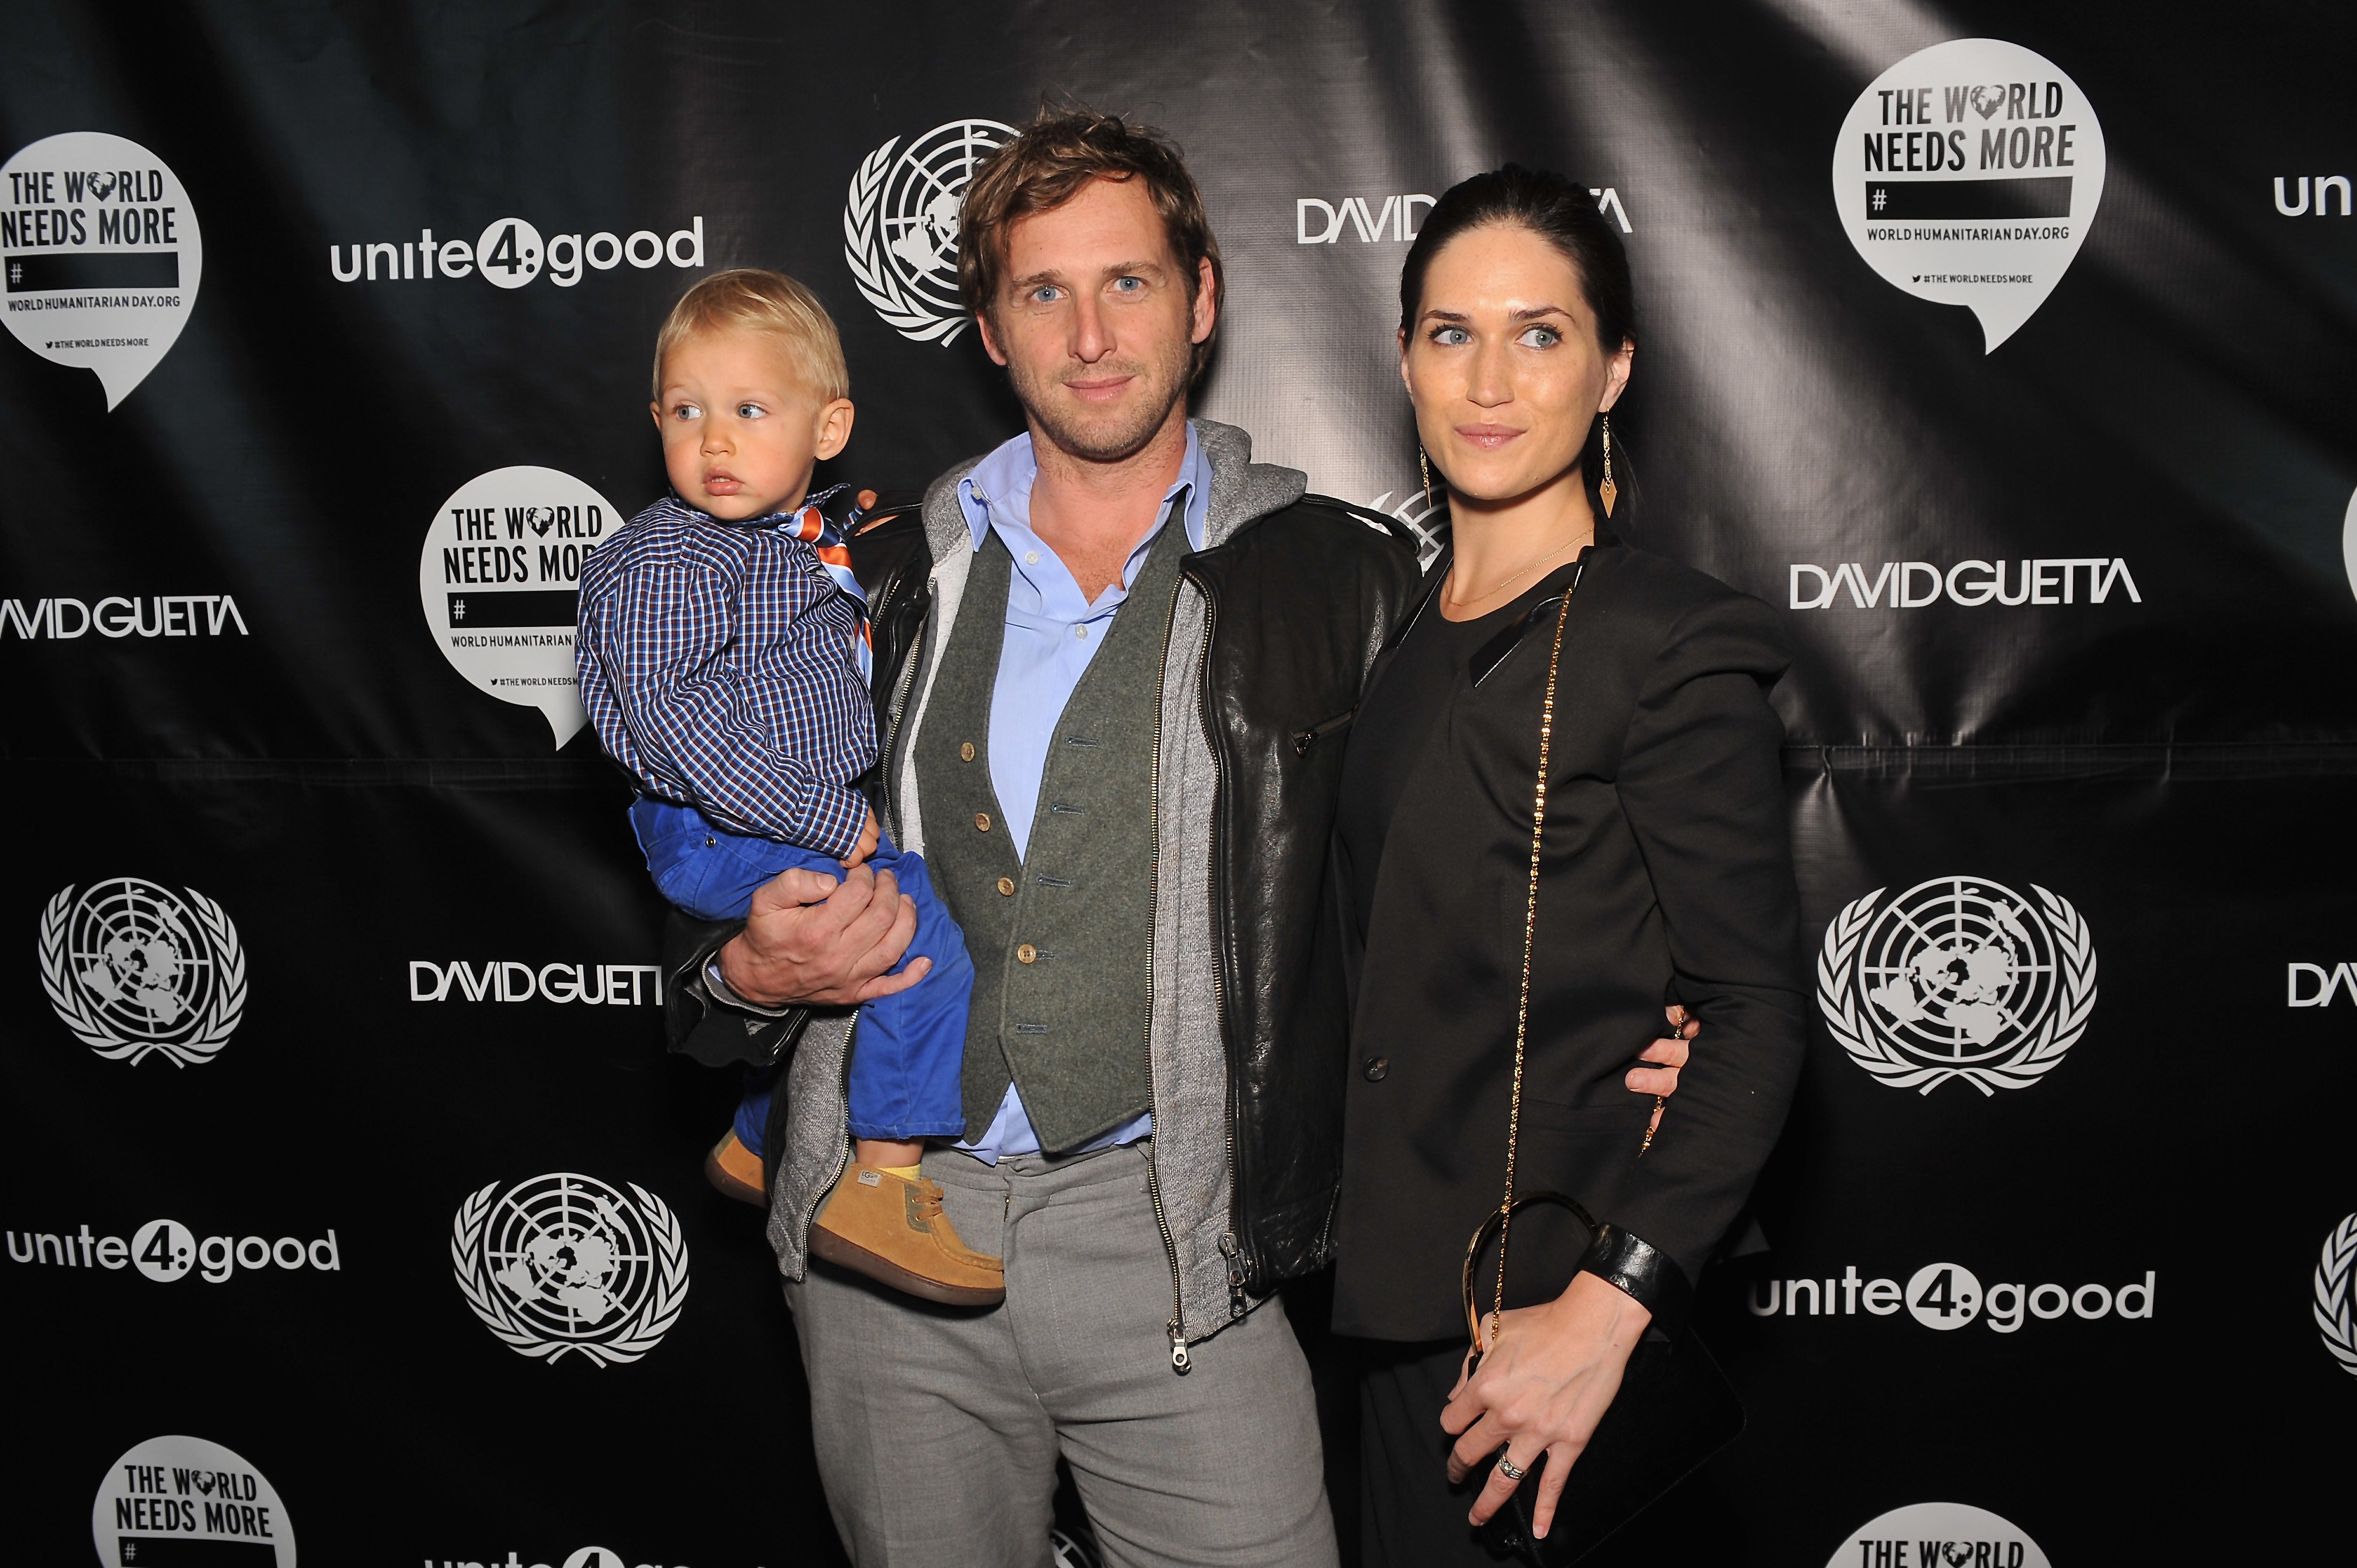 Josh Lucas, Jessica Henriquez, and their son Noah Rev Lucas, attend David Guetta's new music video premiere "One Voice" at the United Nations headquarters on November 22, 2013, in New York City. | Source: Getty Images